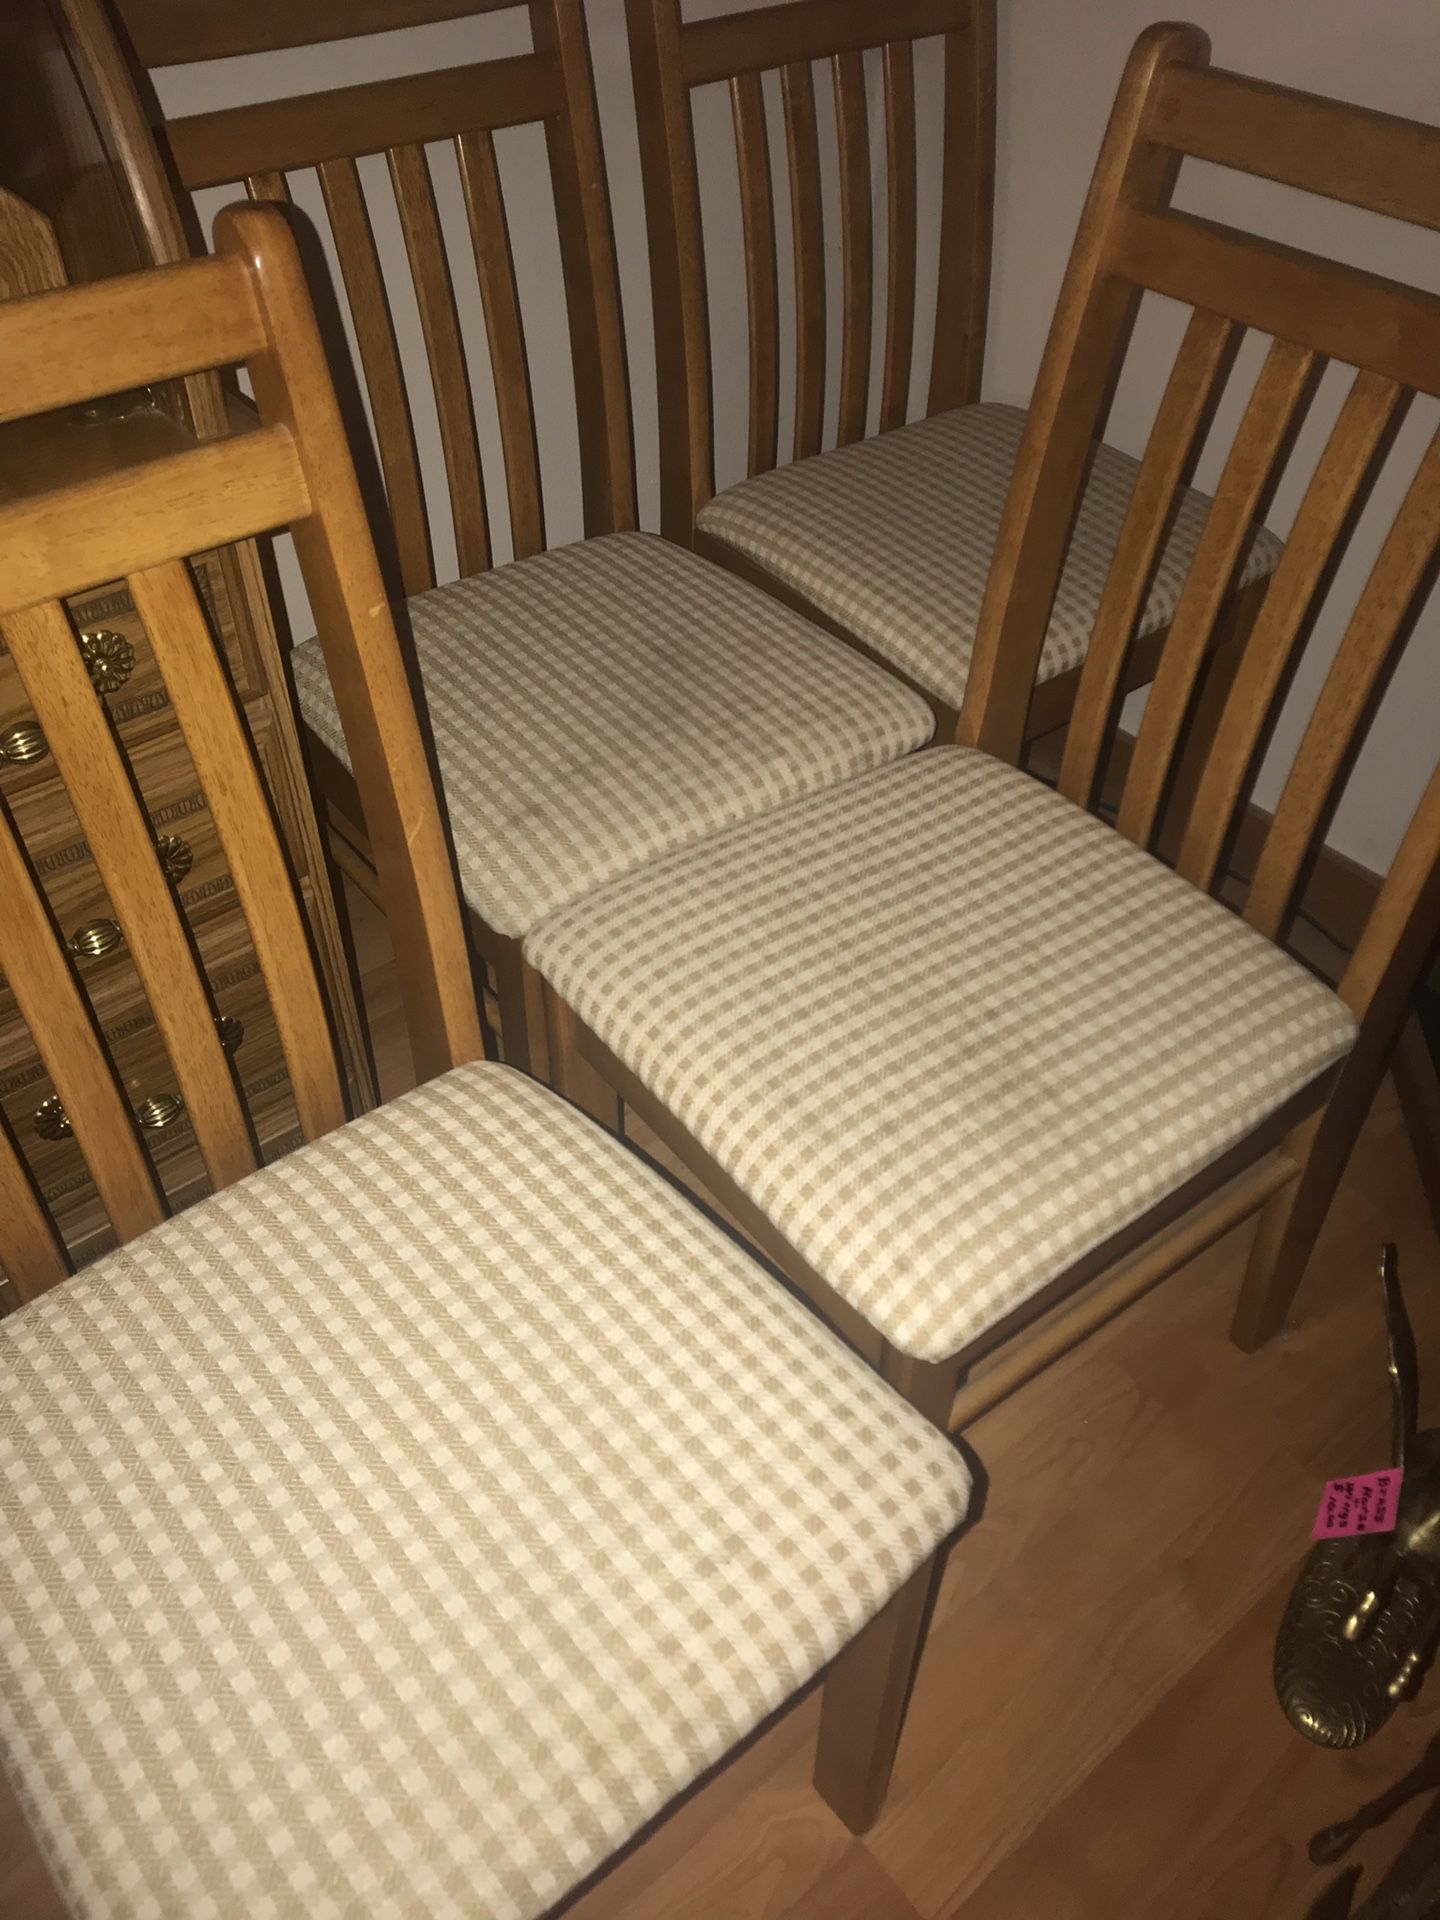 4 Upholstered chairs